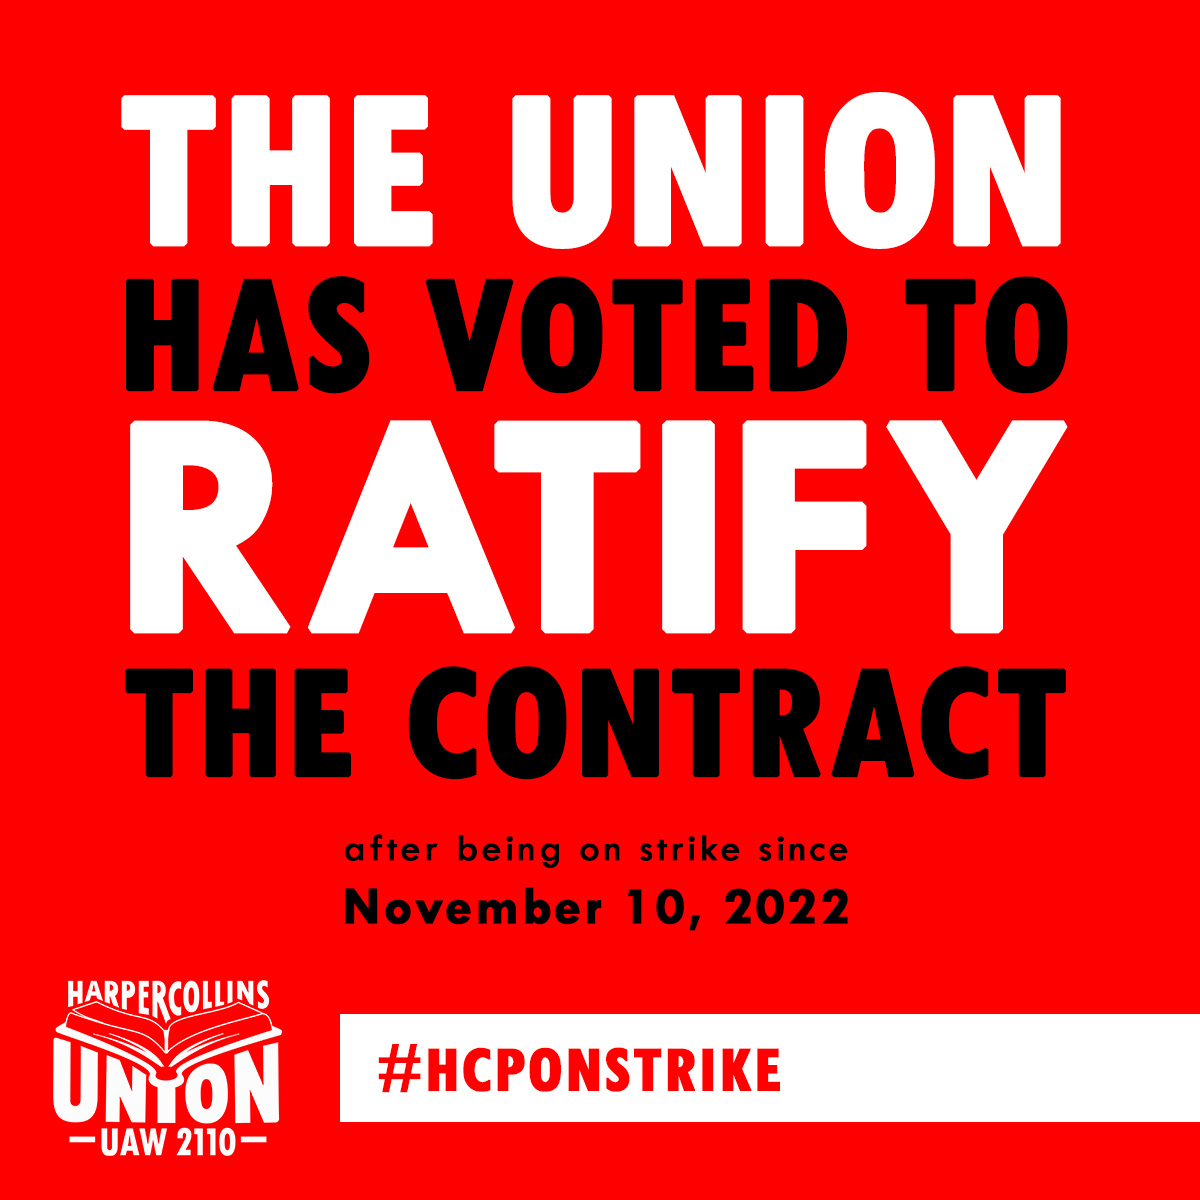 Big News!!! We have voted to ratfiy the contract and will be returning to work 2/21. We're excited to get back to work and join our colleagues again. #HarperCollins #HCPOnStrike #HarperCollinsUnion